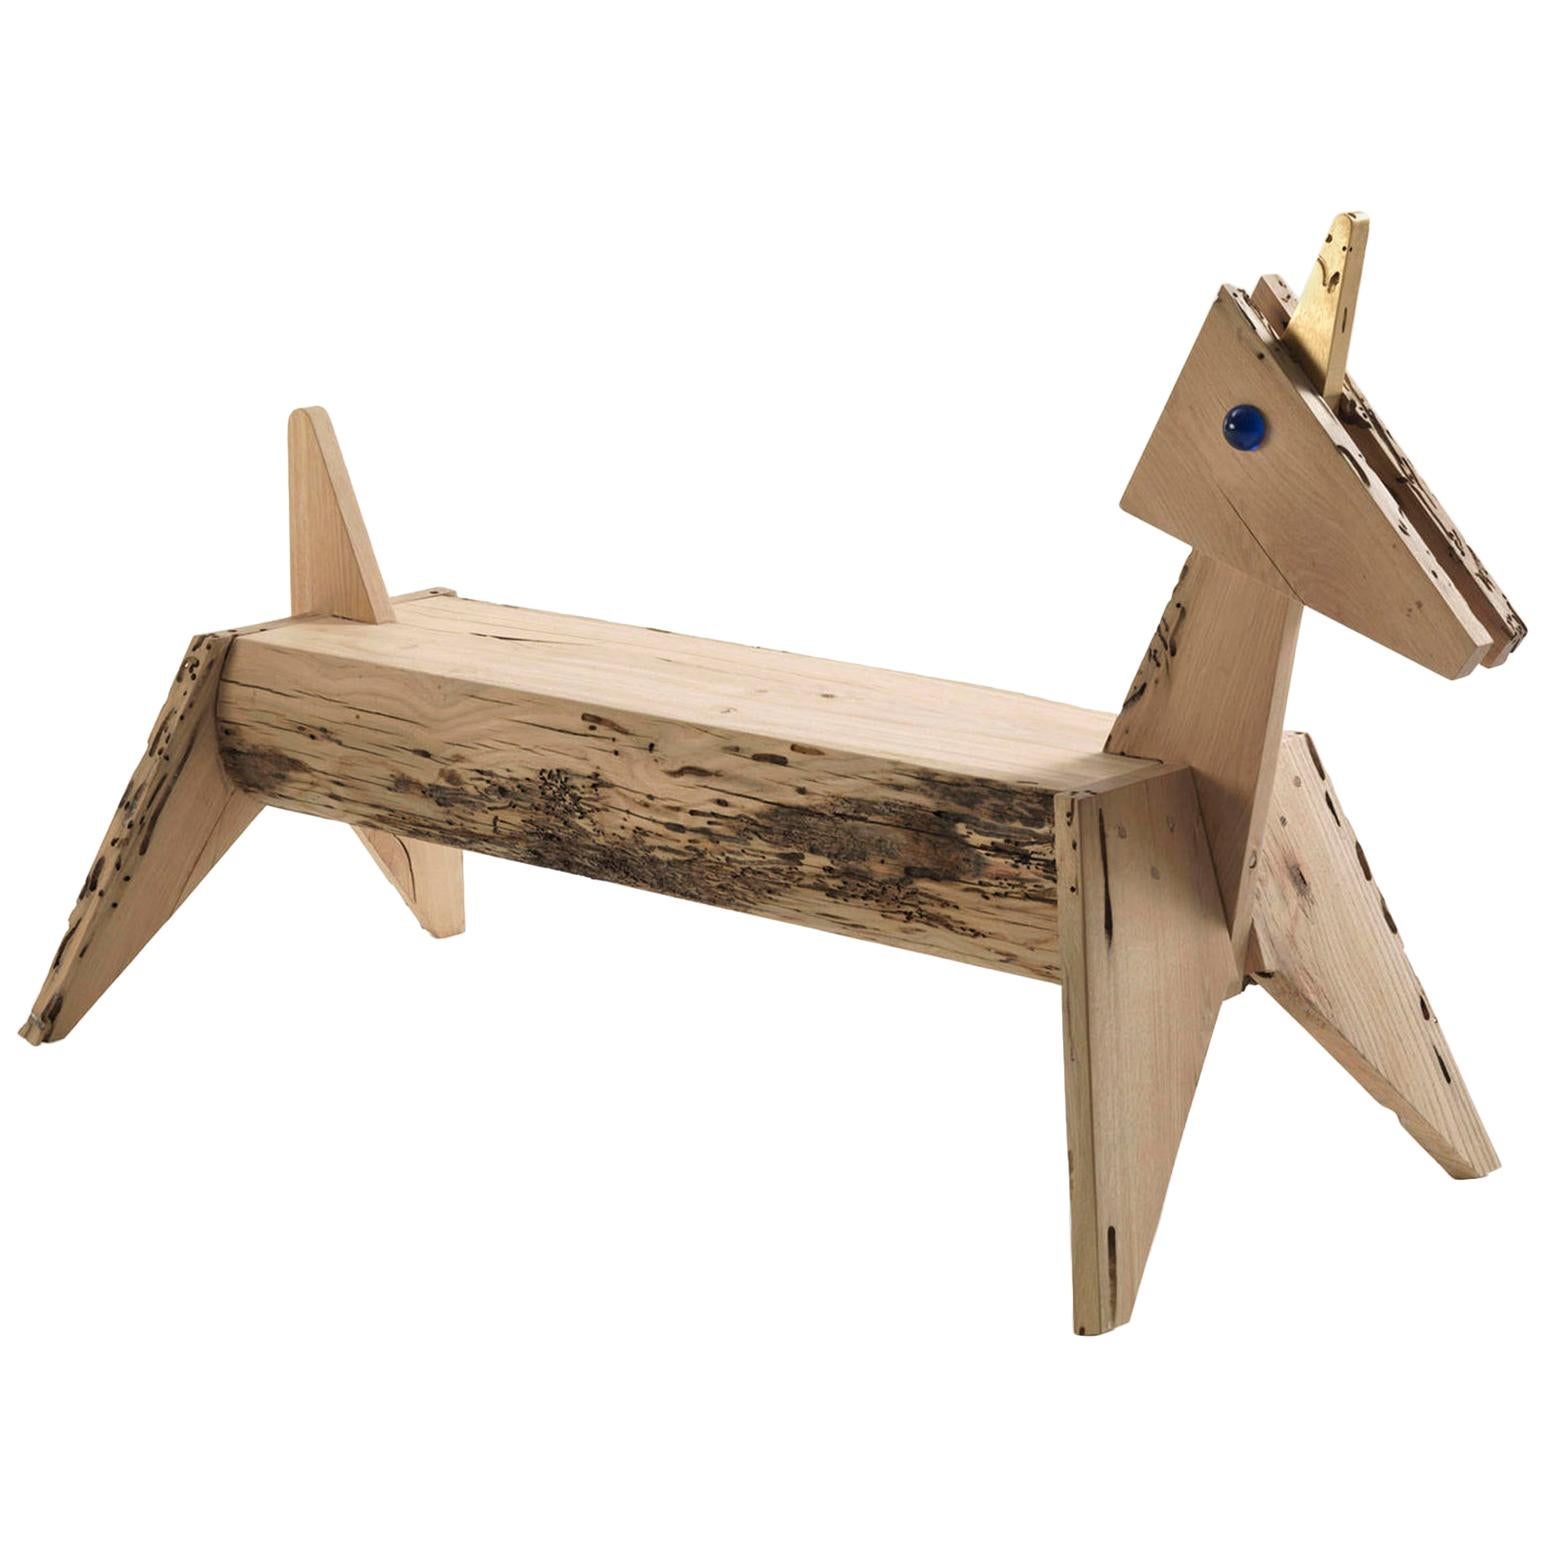 Unicorn Bench For Sale